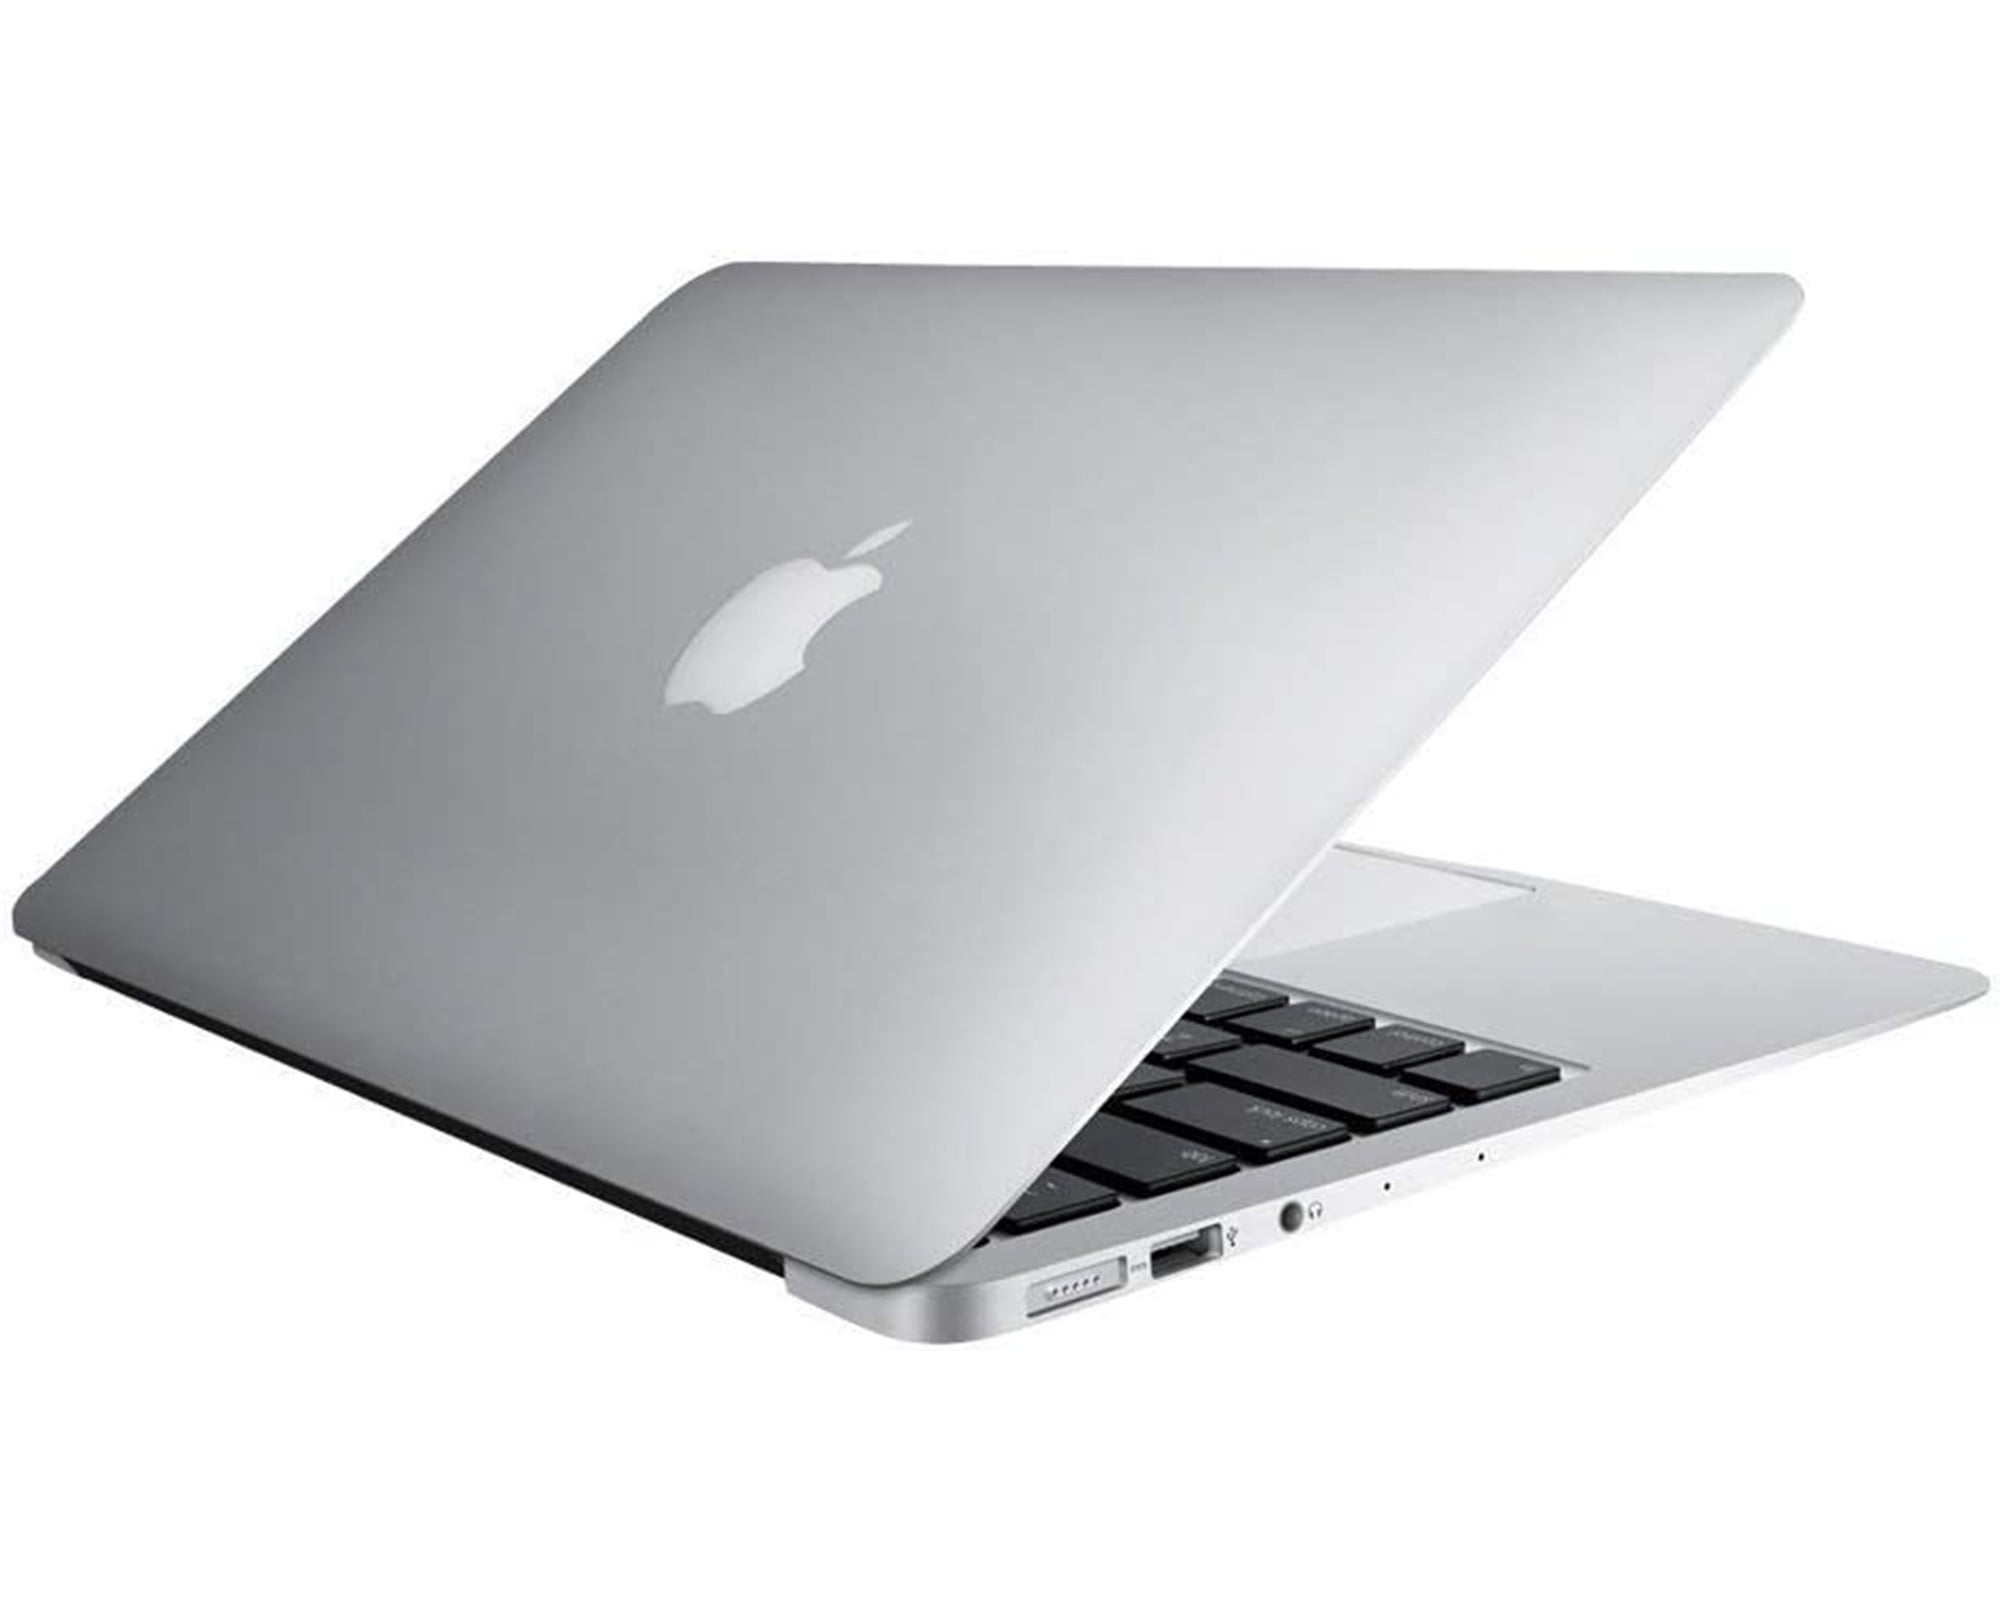 PC/タブレット ノートPC Apple MacBook Air with Apple M1 Chip (13-inch, 8GB RAM, 256GB SSD 